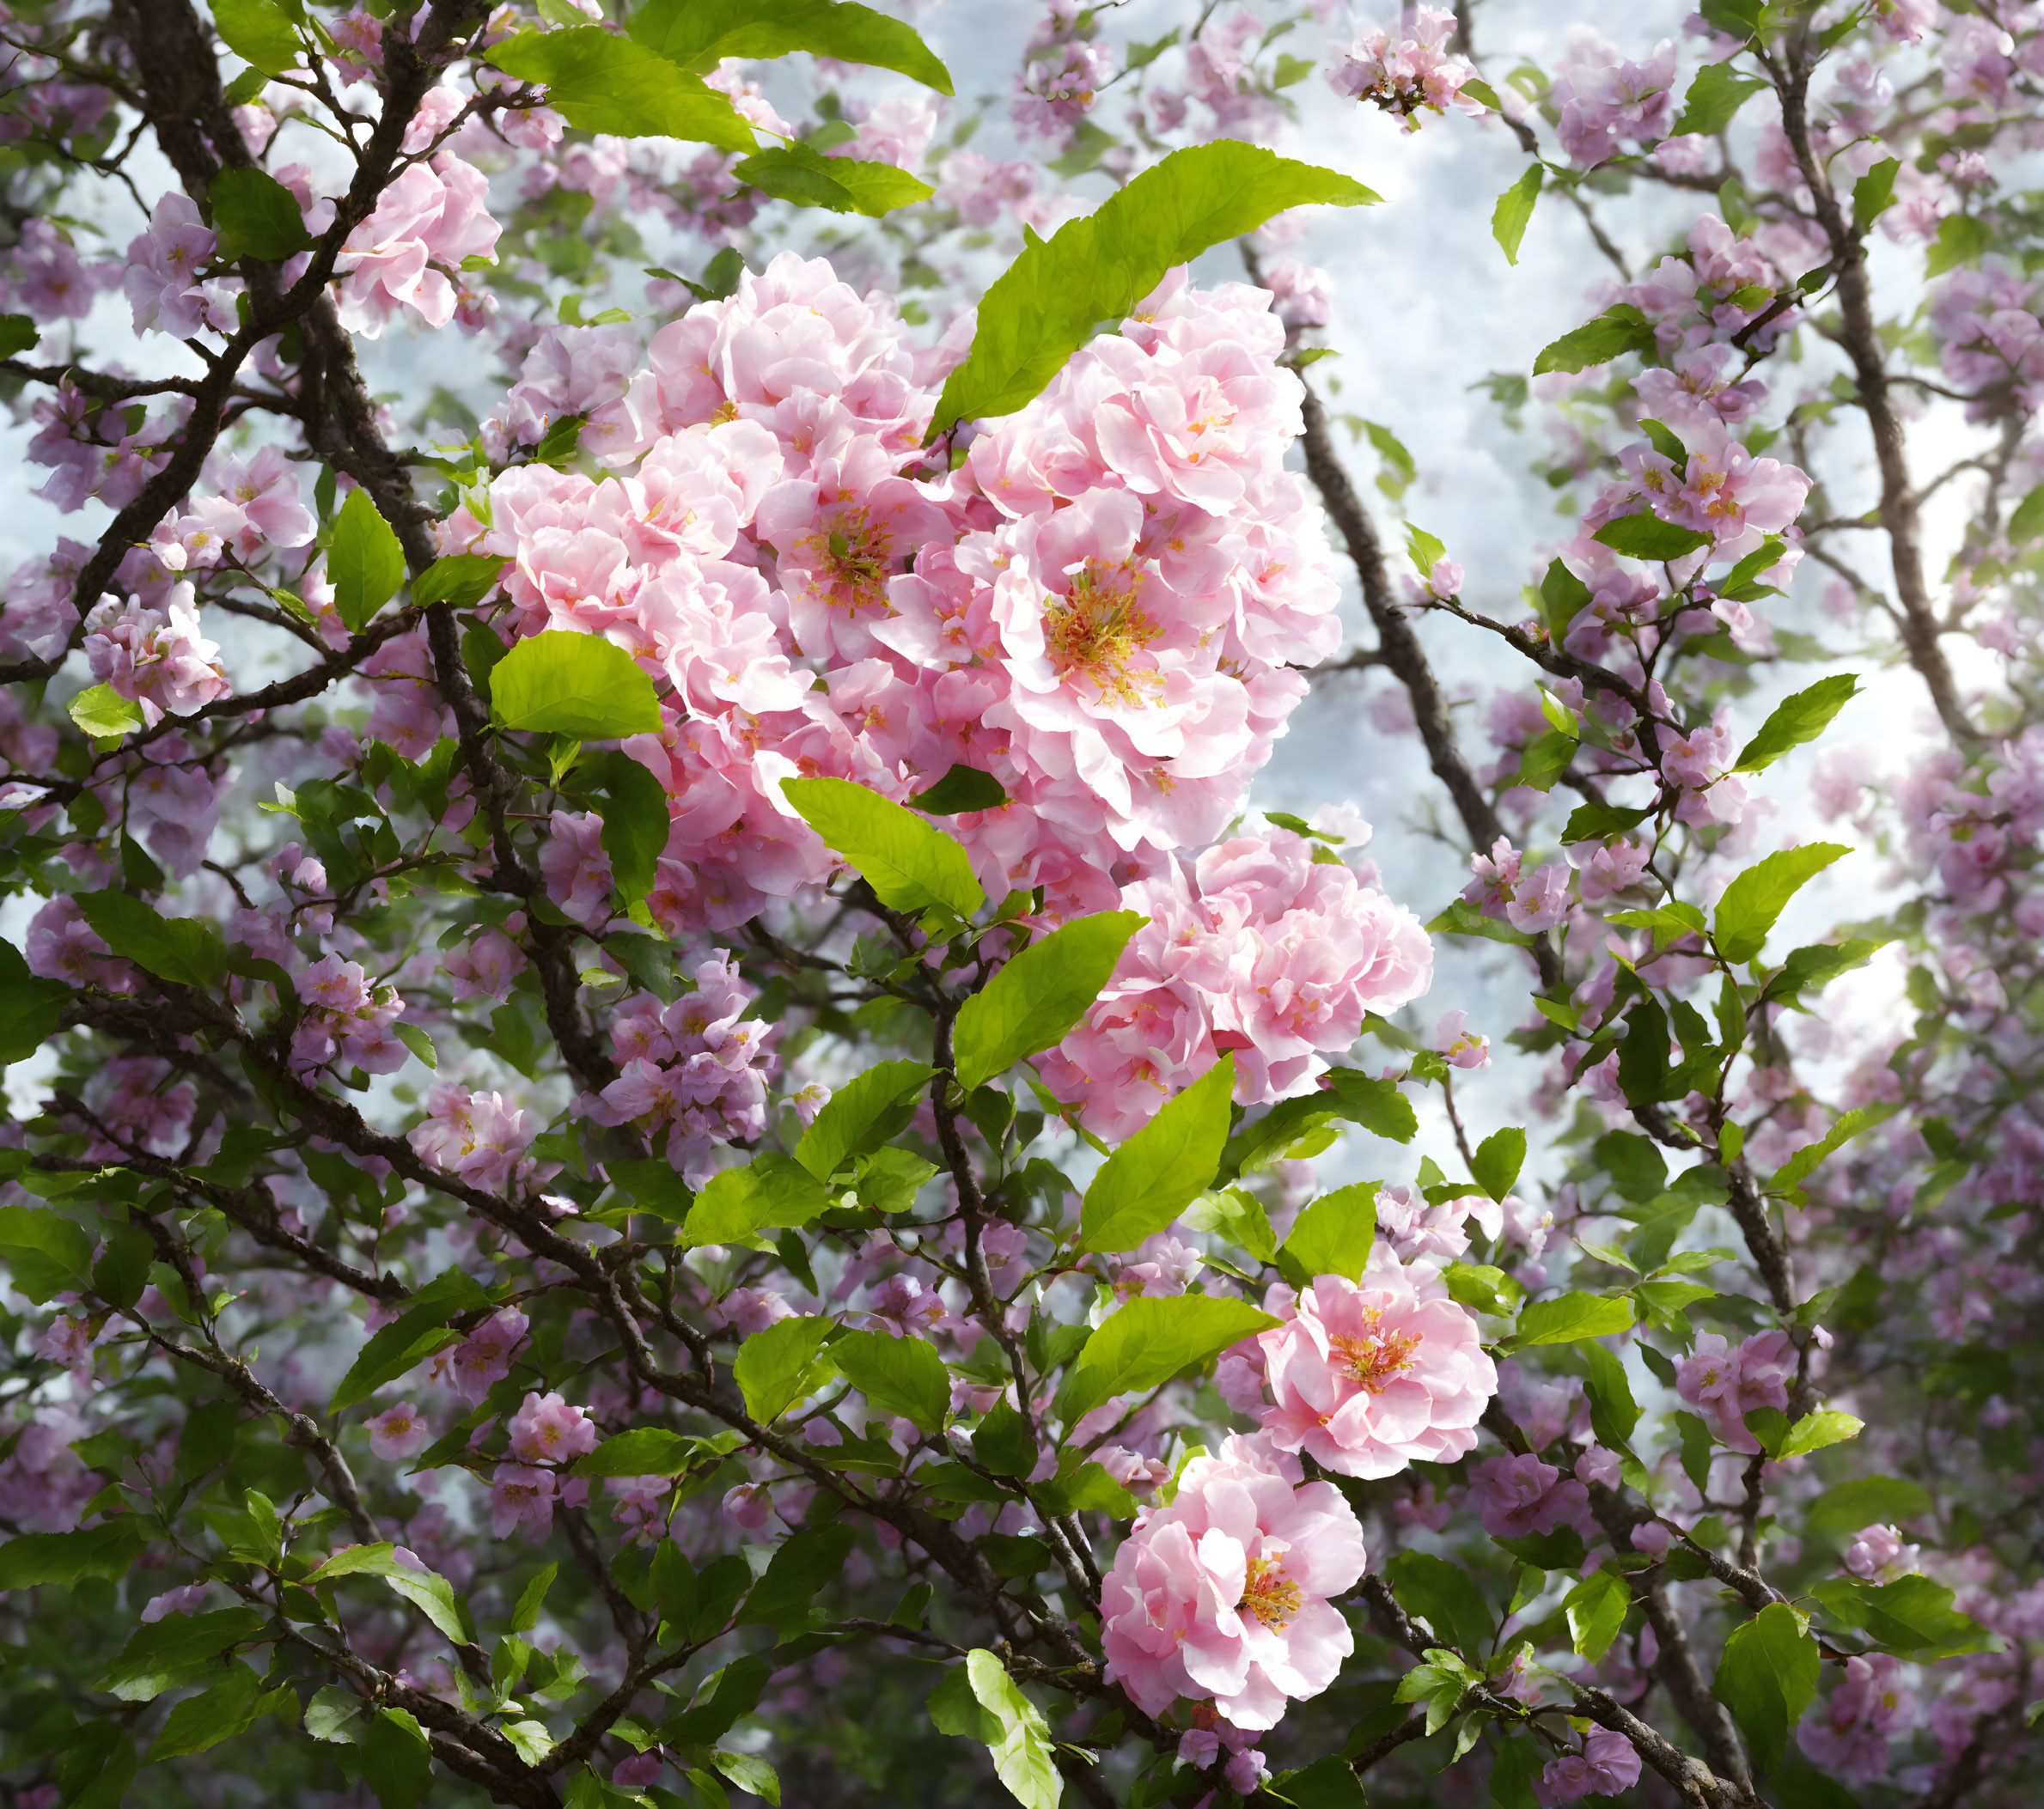 Pink Cherry Blossoms in Full Bloom Against Blurred Floral Background